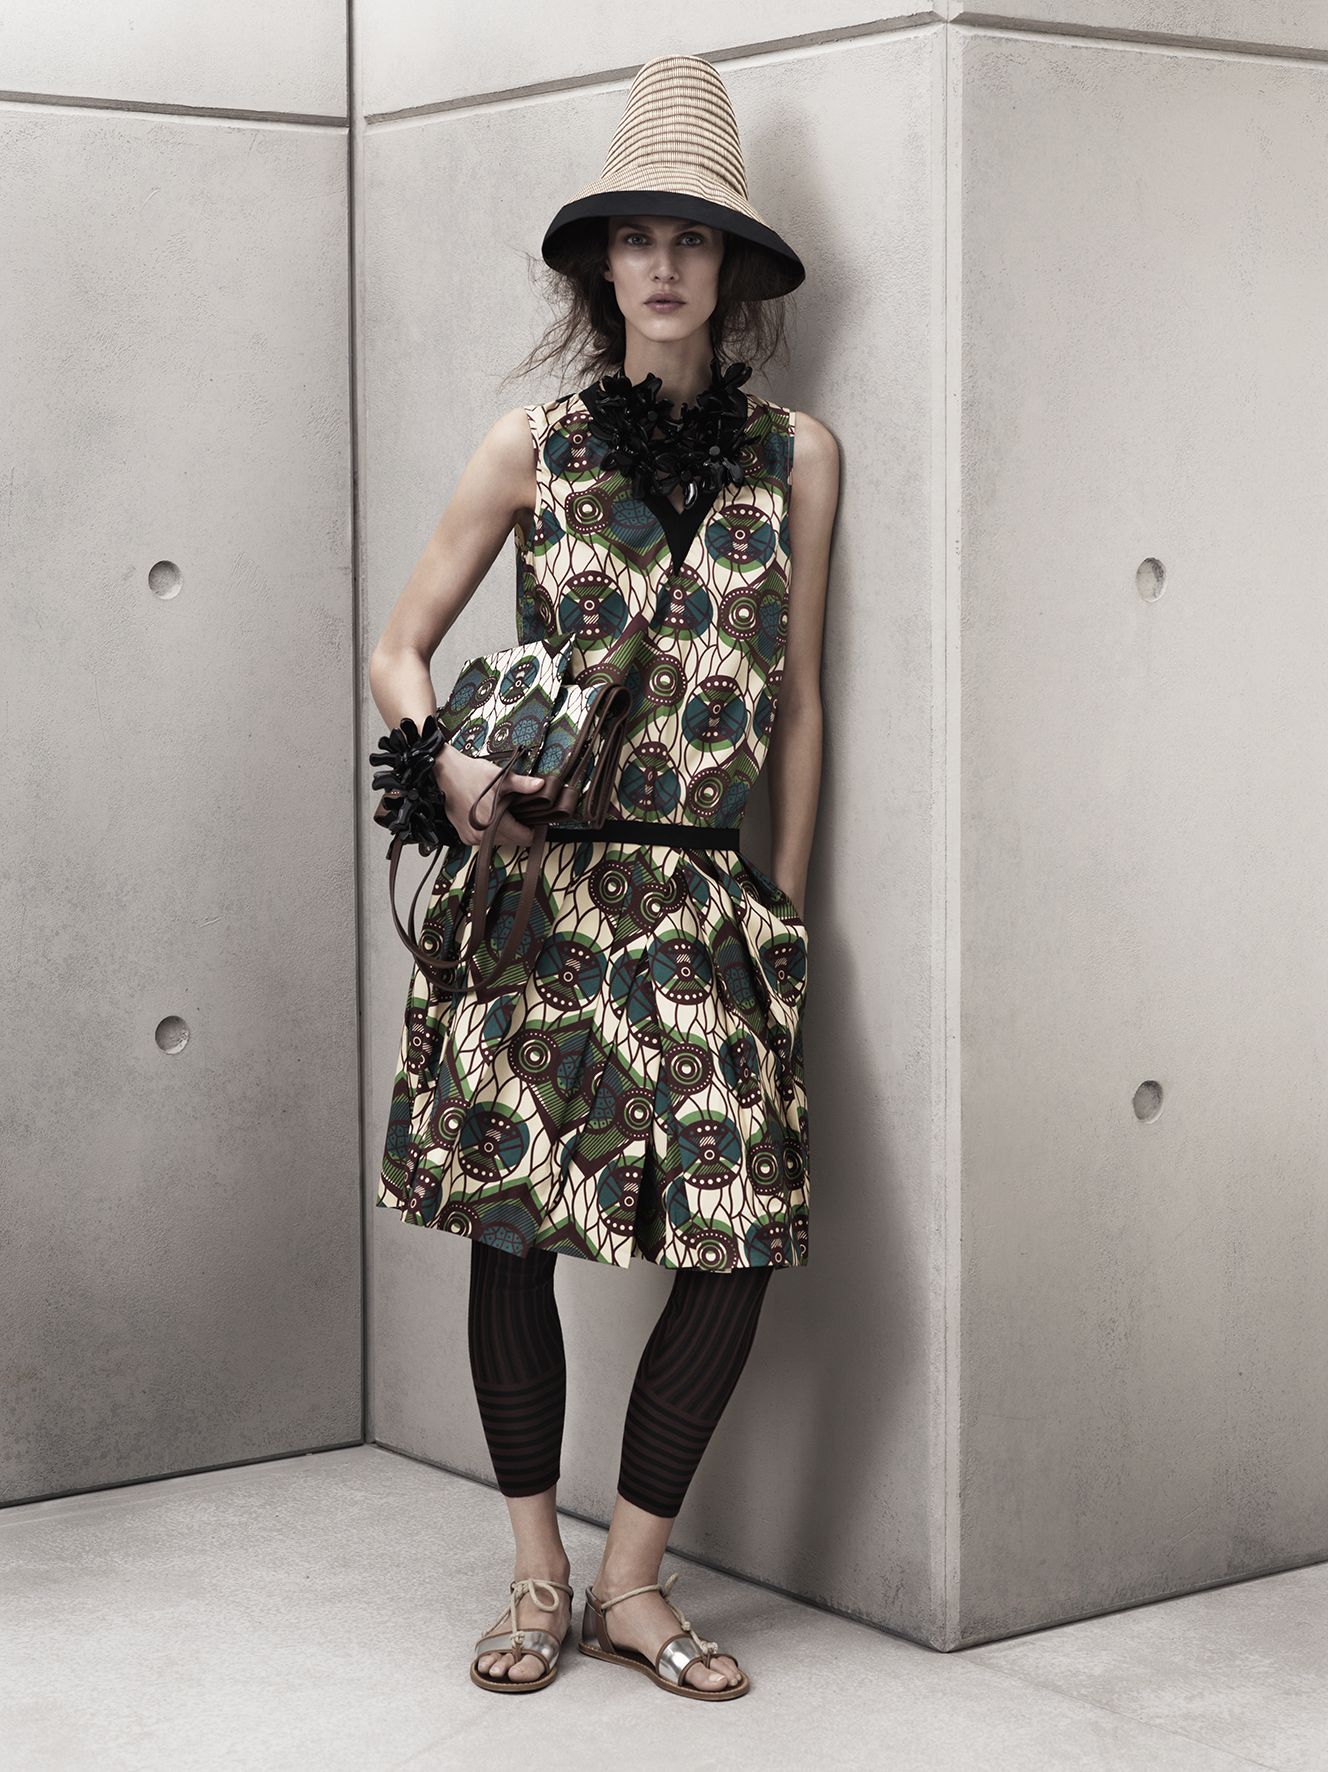 Marni for H&M Collection